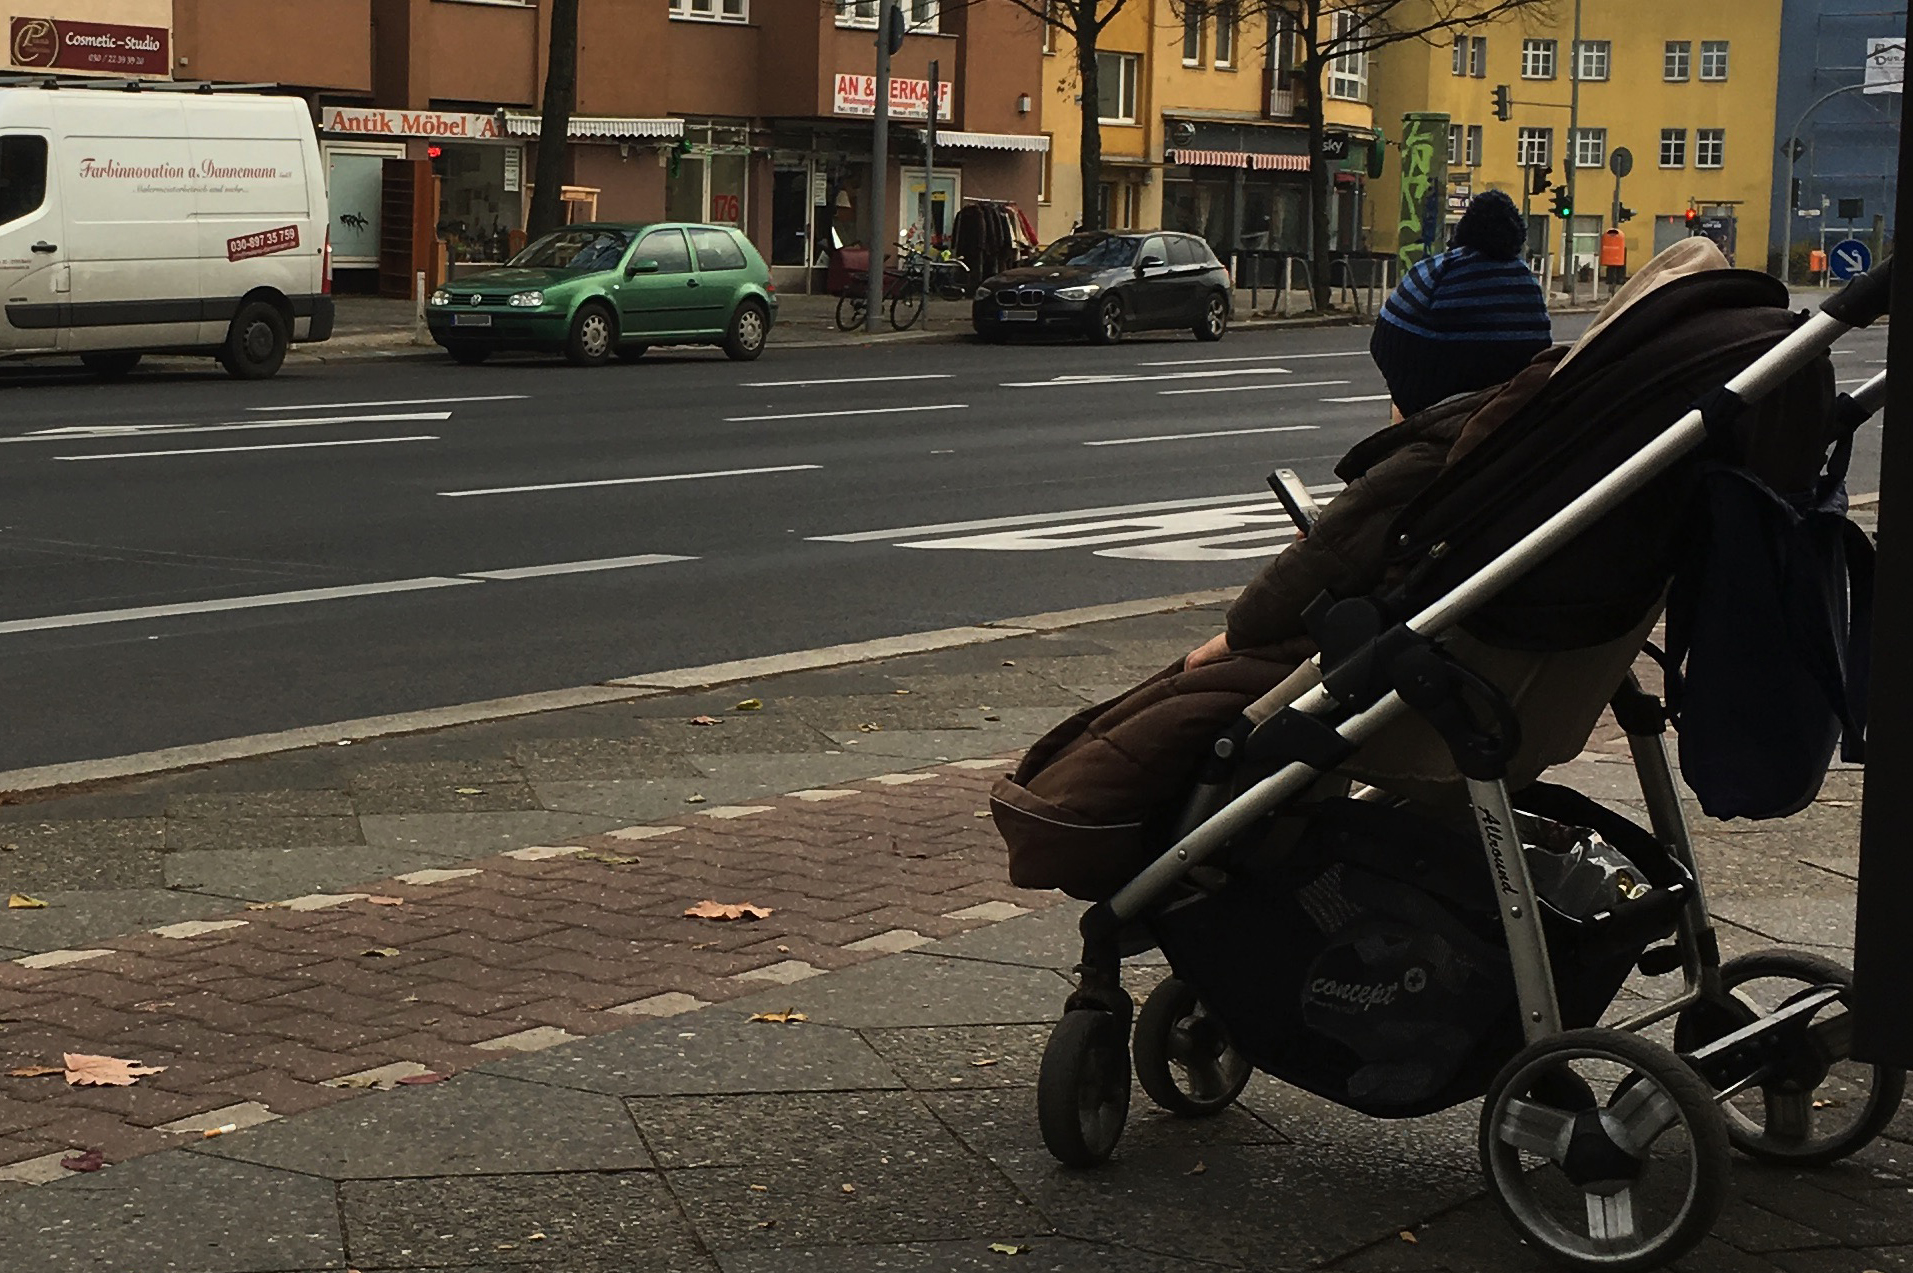 A toddler in a stroller, holding a mobile phone.